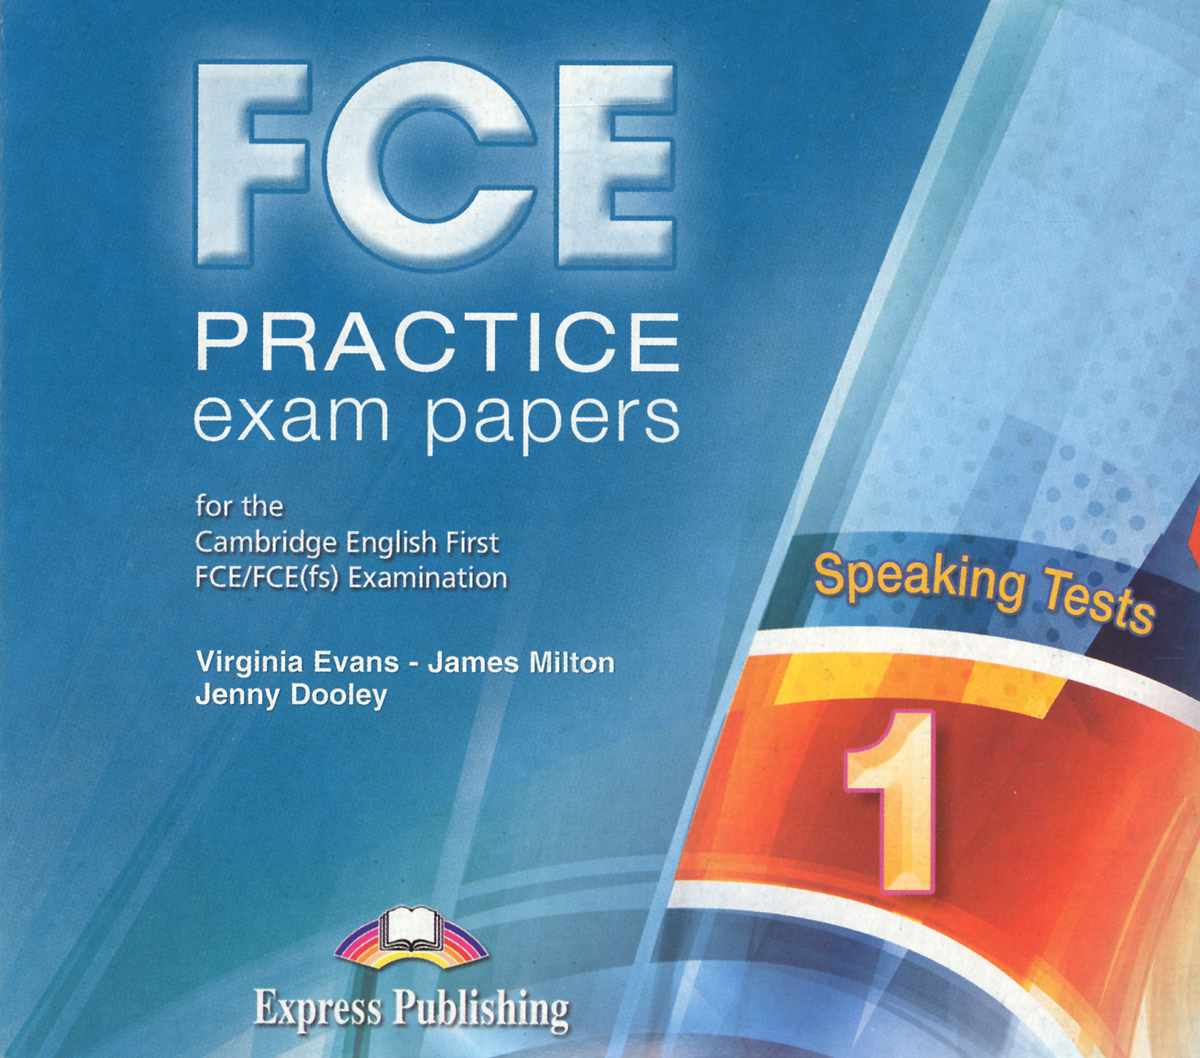 FCE Practice Exam Papers 1: For the Cambridge English First FCE / FCE (fs) Examination (аудиокурс на 2 CD)